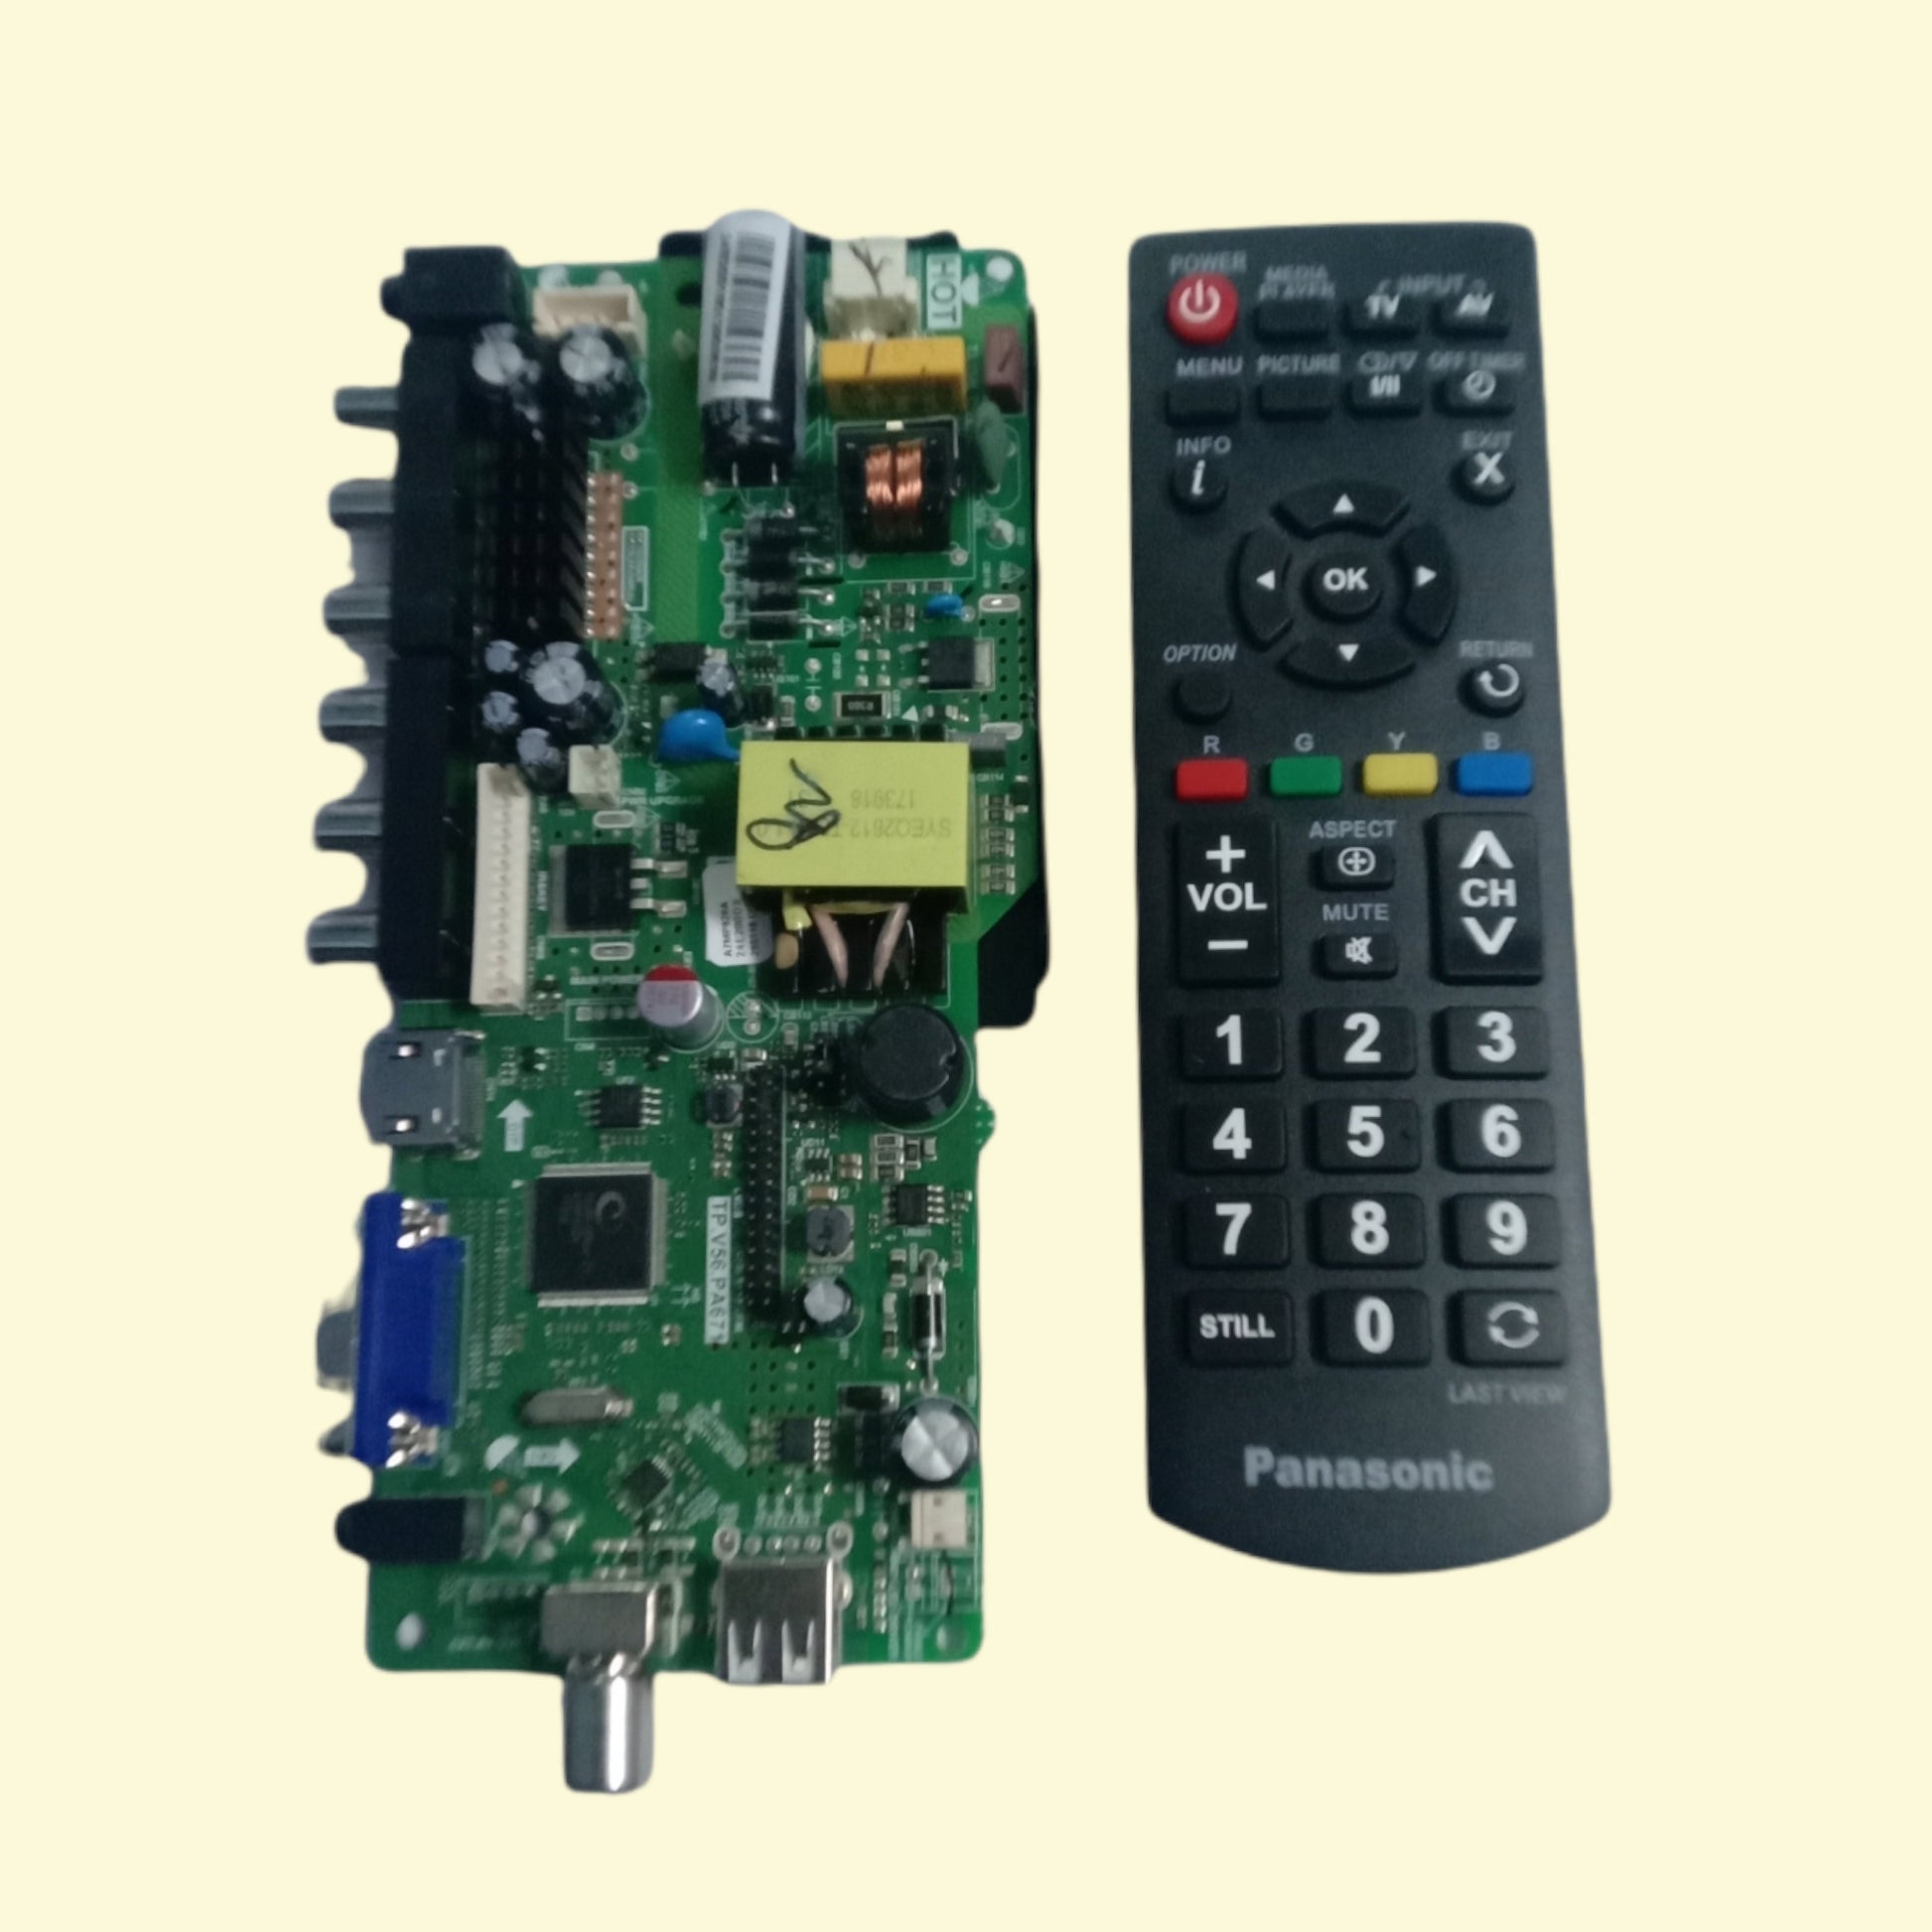 Panasonic 24 inch LED /LCD TV Combo Board suitable for all Brand TV with Remote - Faritha